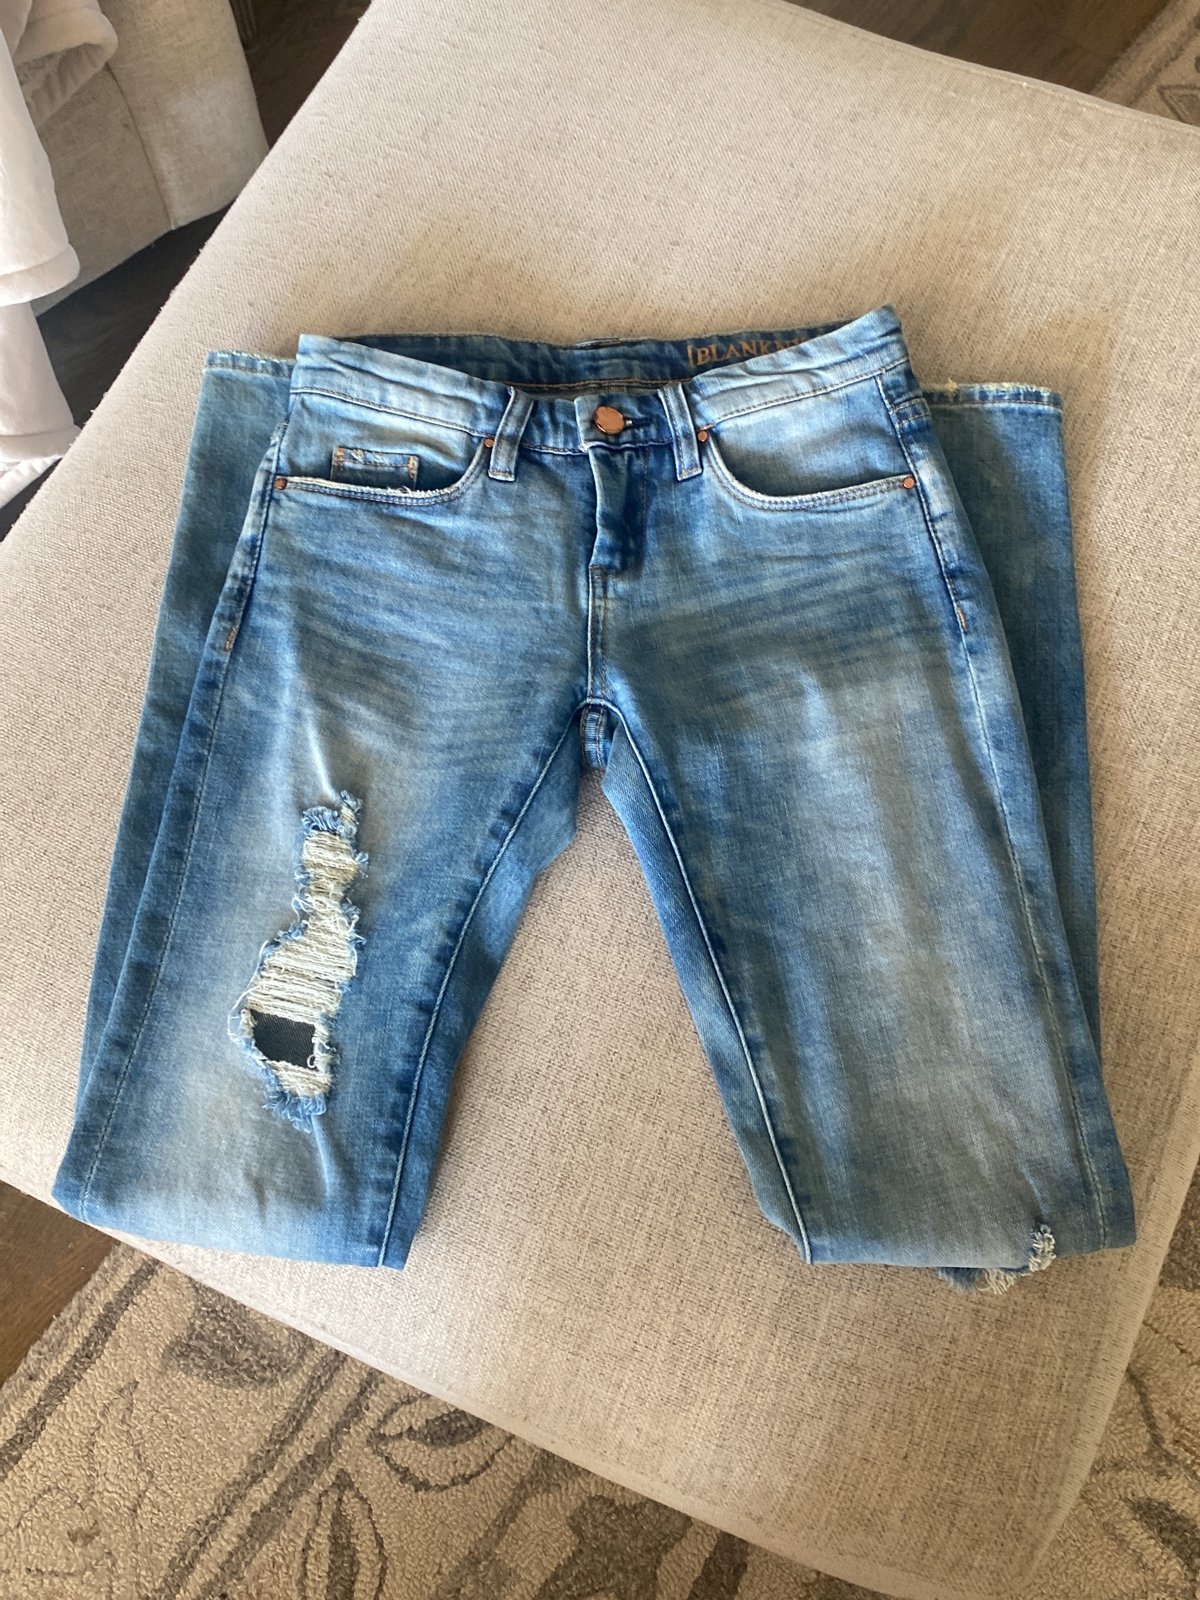 high discount Blanknyc Jeans Jv9Iy9A8s Buying Cheap